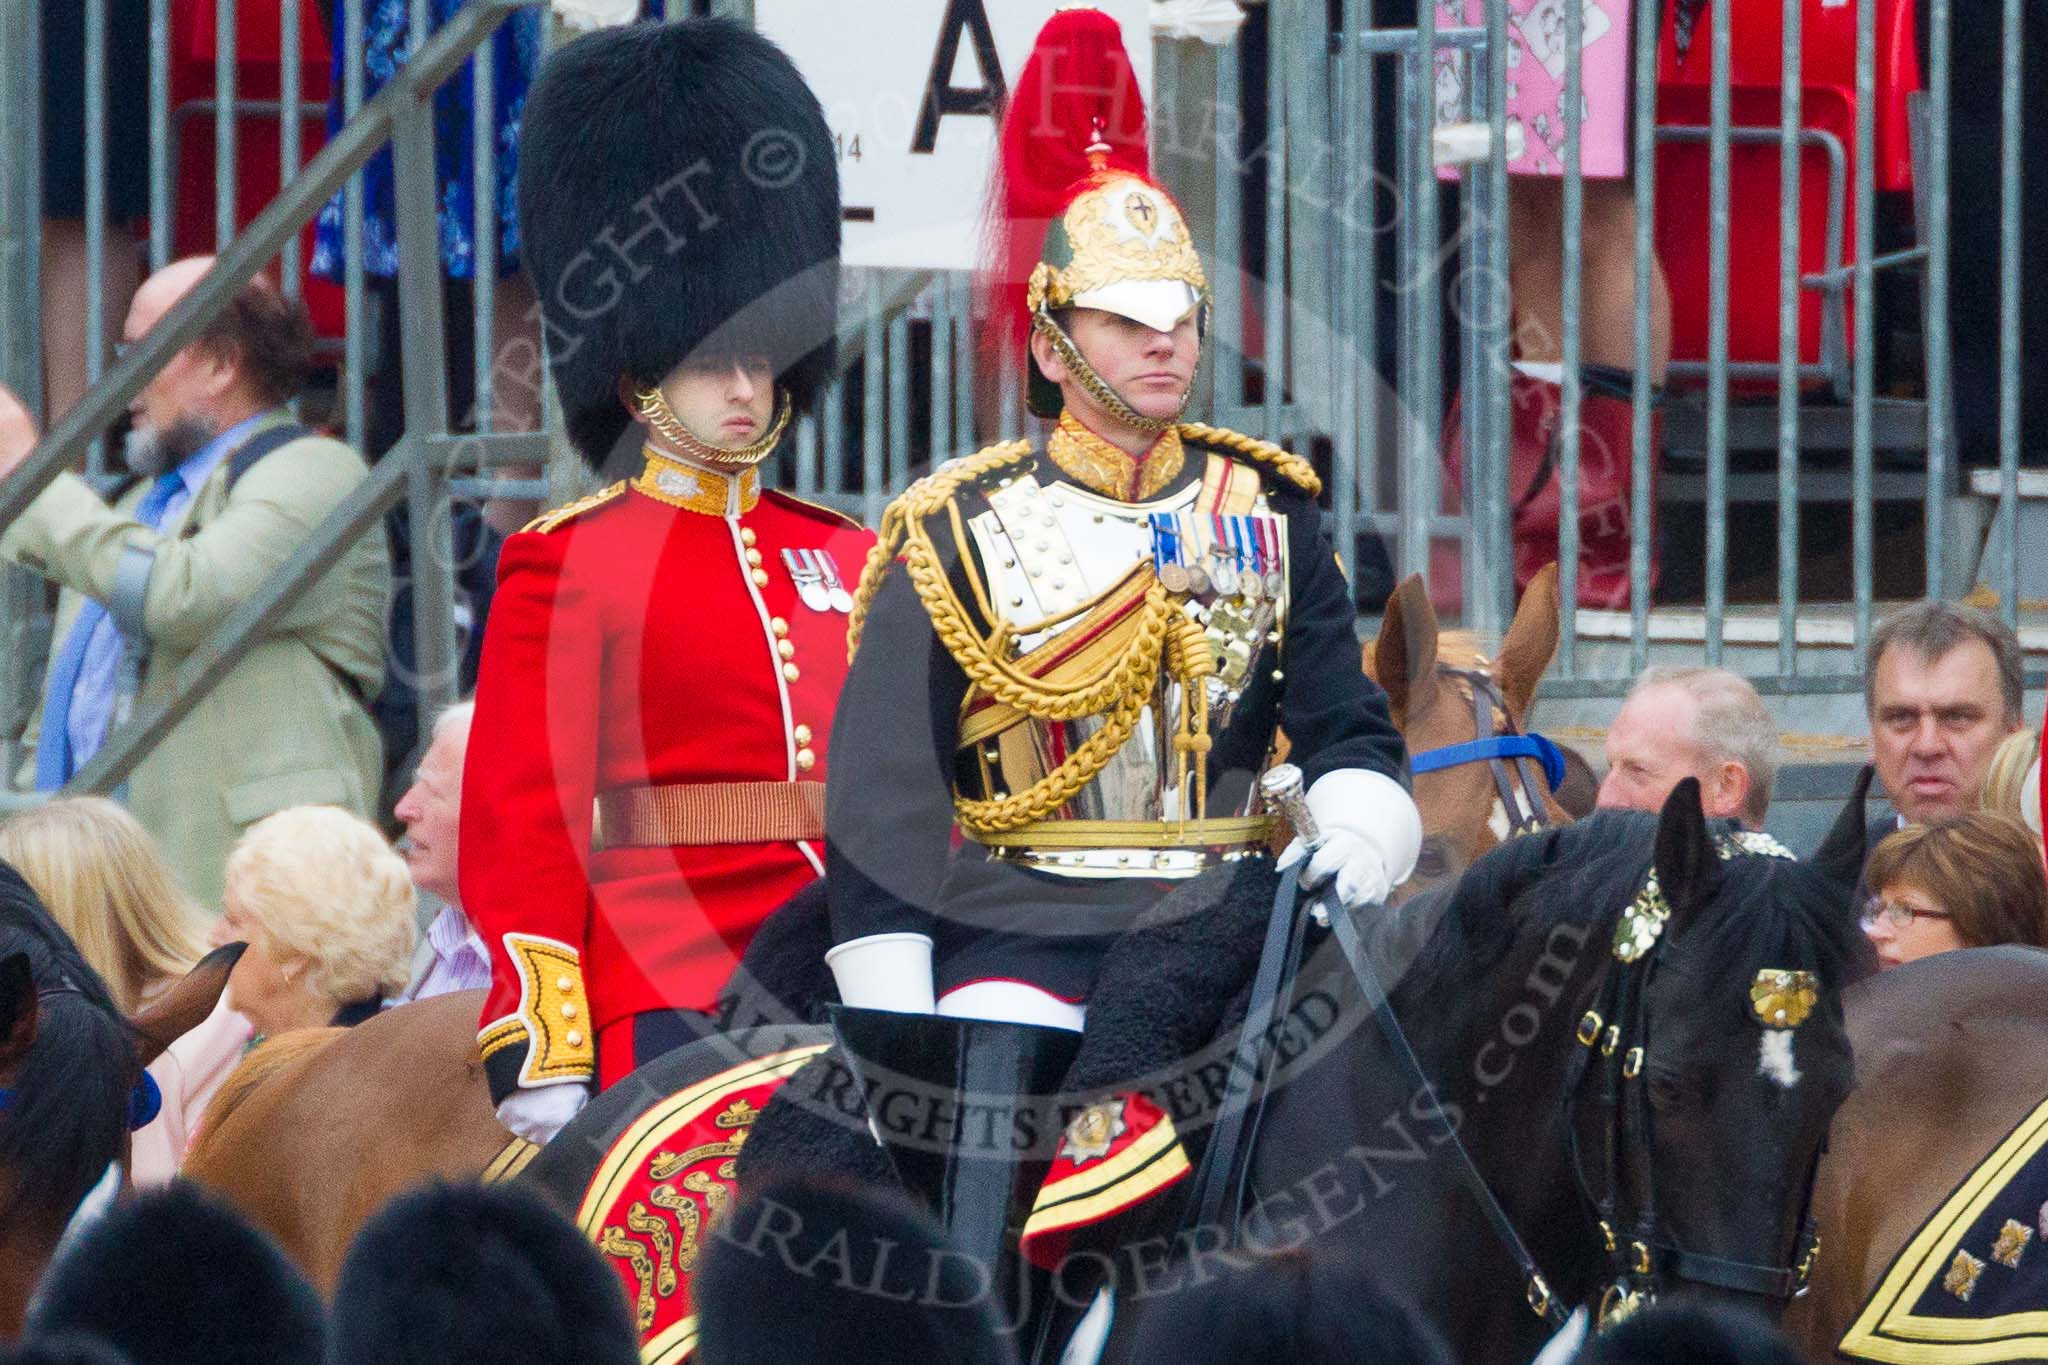 Trooping the Colour 2015. Image #248, 13 June 2015 10:59 Horse Guards Parade, London, UK